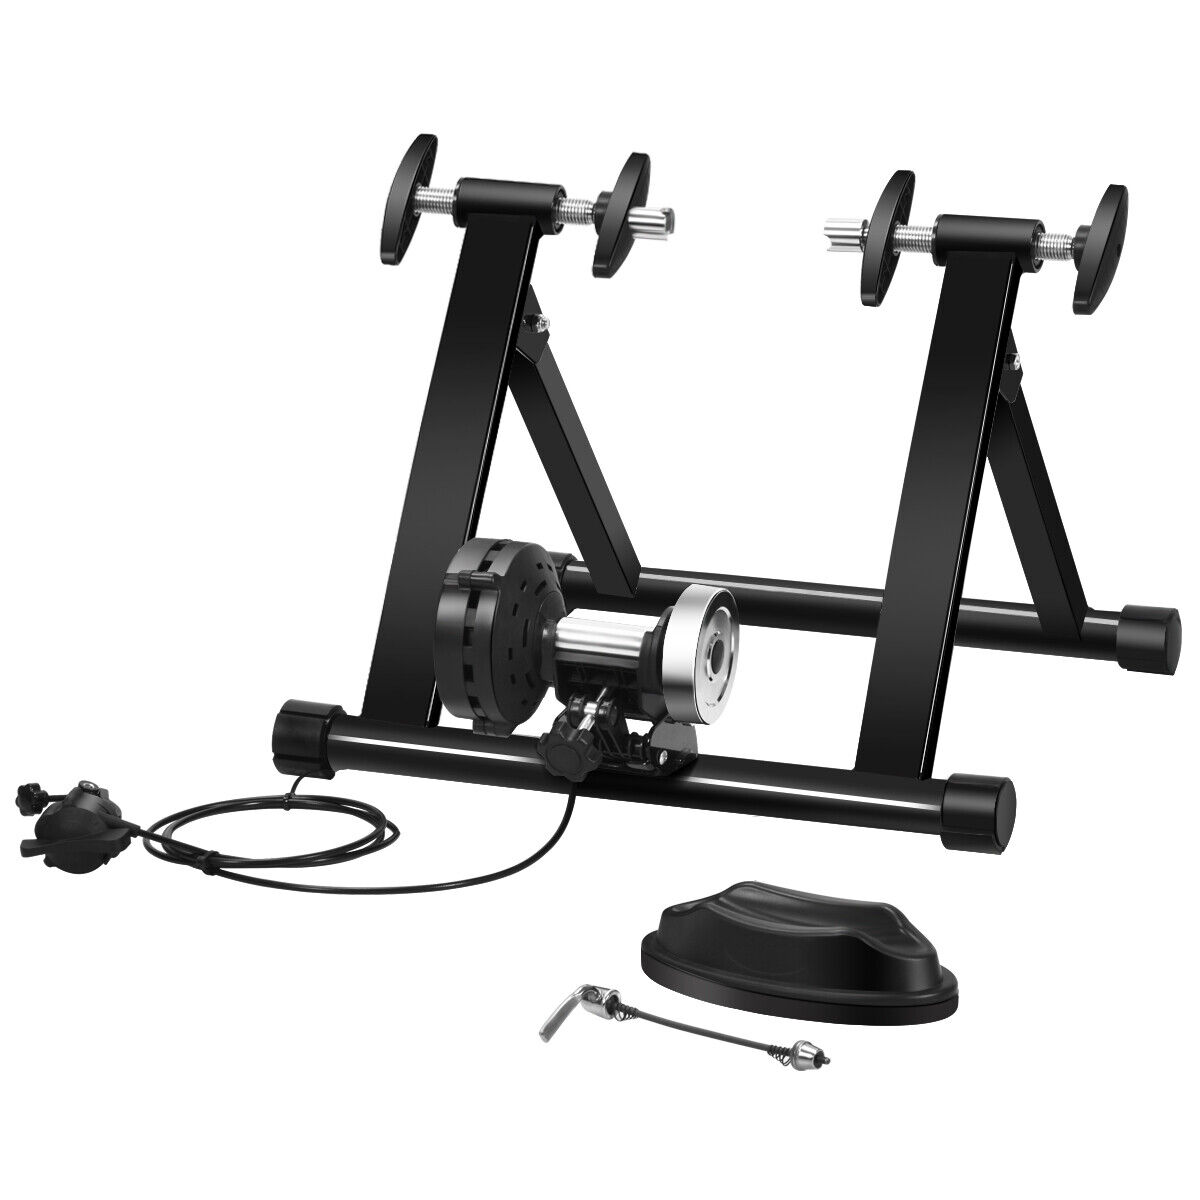 Folding Magnetic Bike Trainer Stand Bicycle Riding Exercise W/8 Adjustable Speed